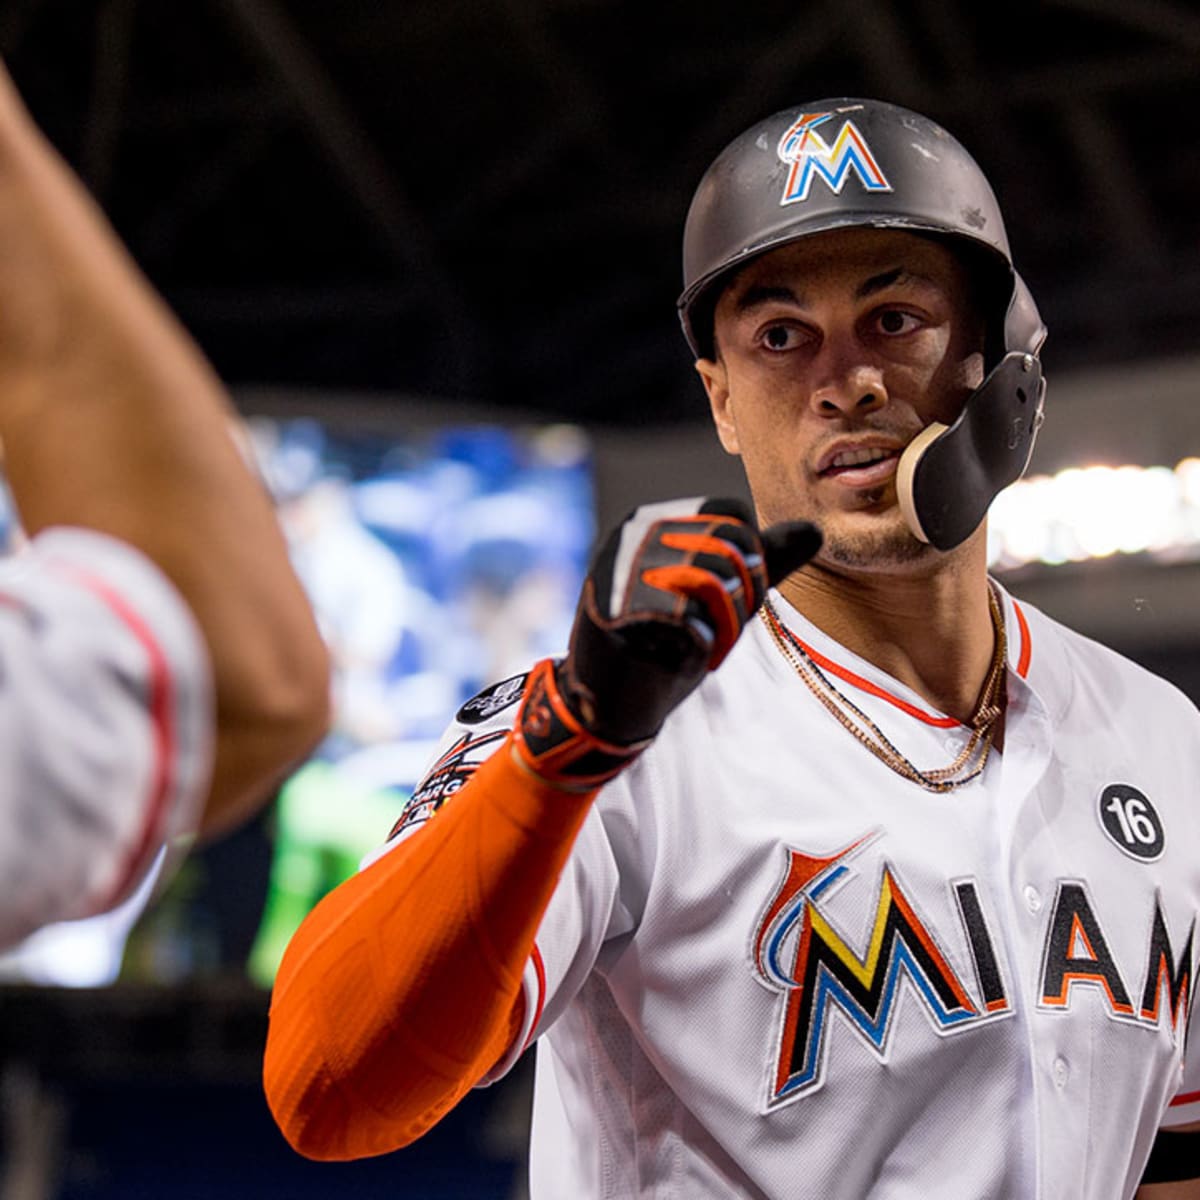 Player of month award offers little solace for Marlins' Giancarlo